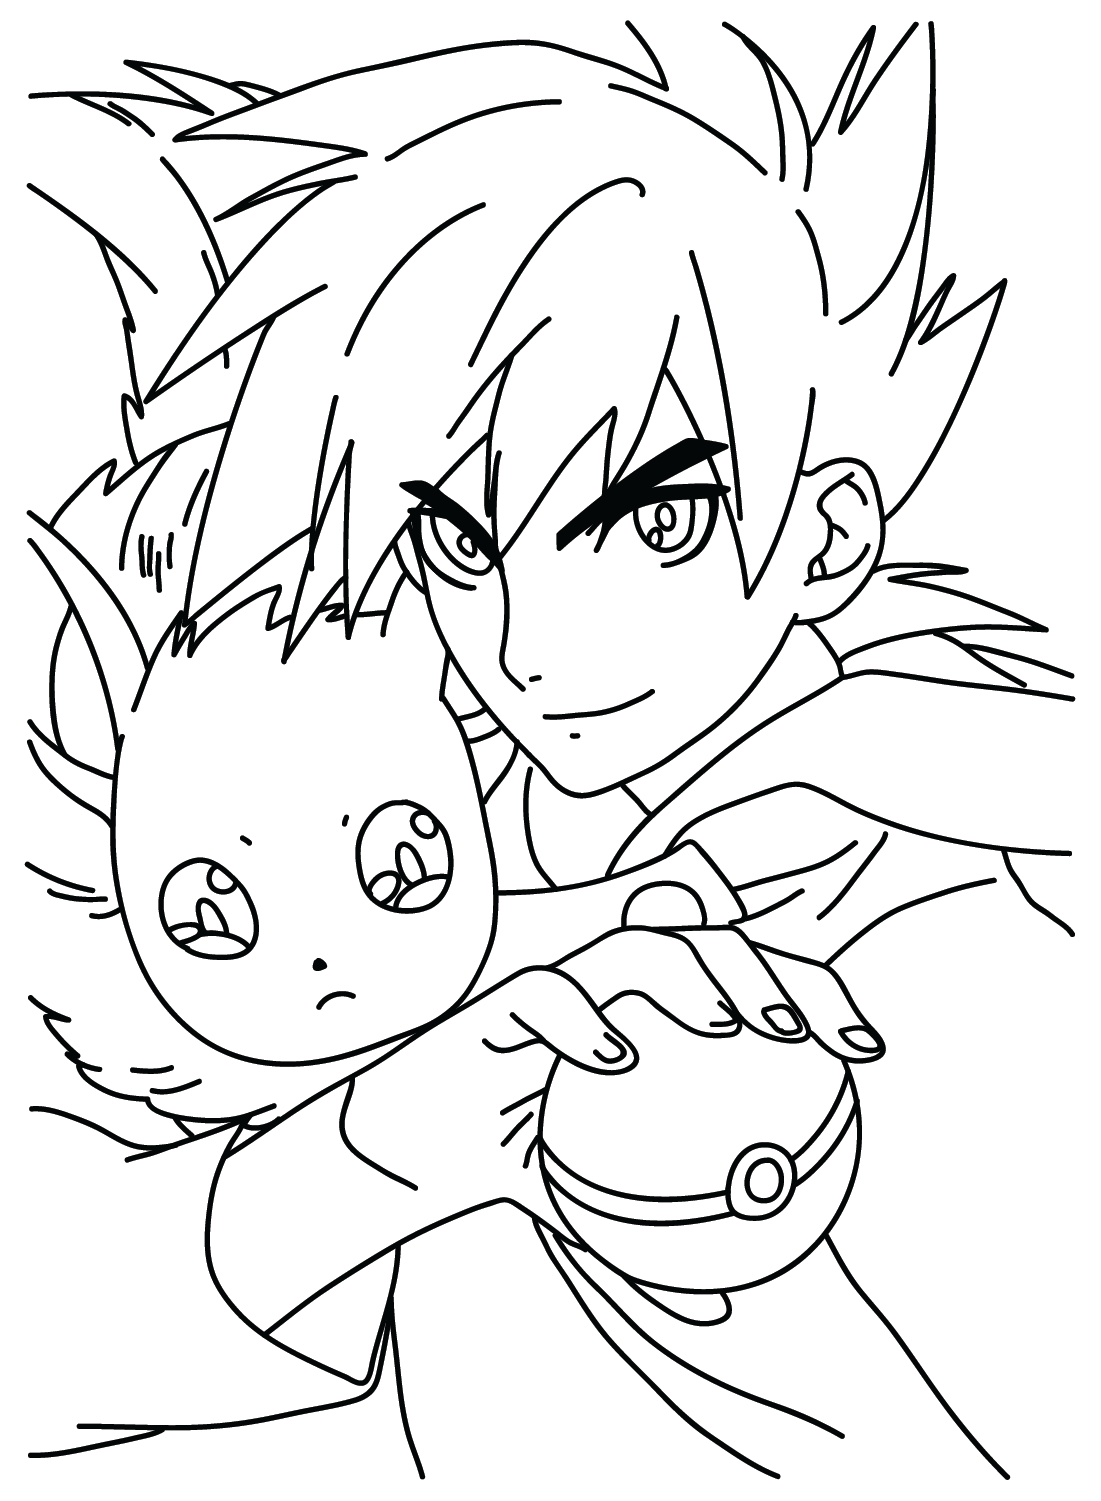 Eevee and Gary Oak of Pokemon to Color from Eevee